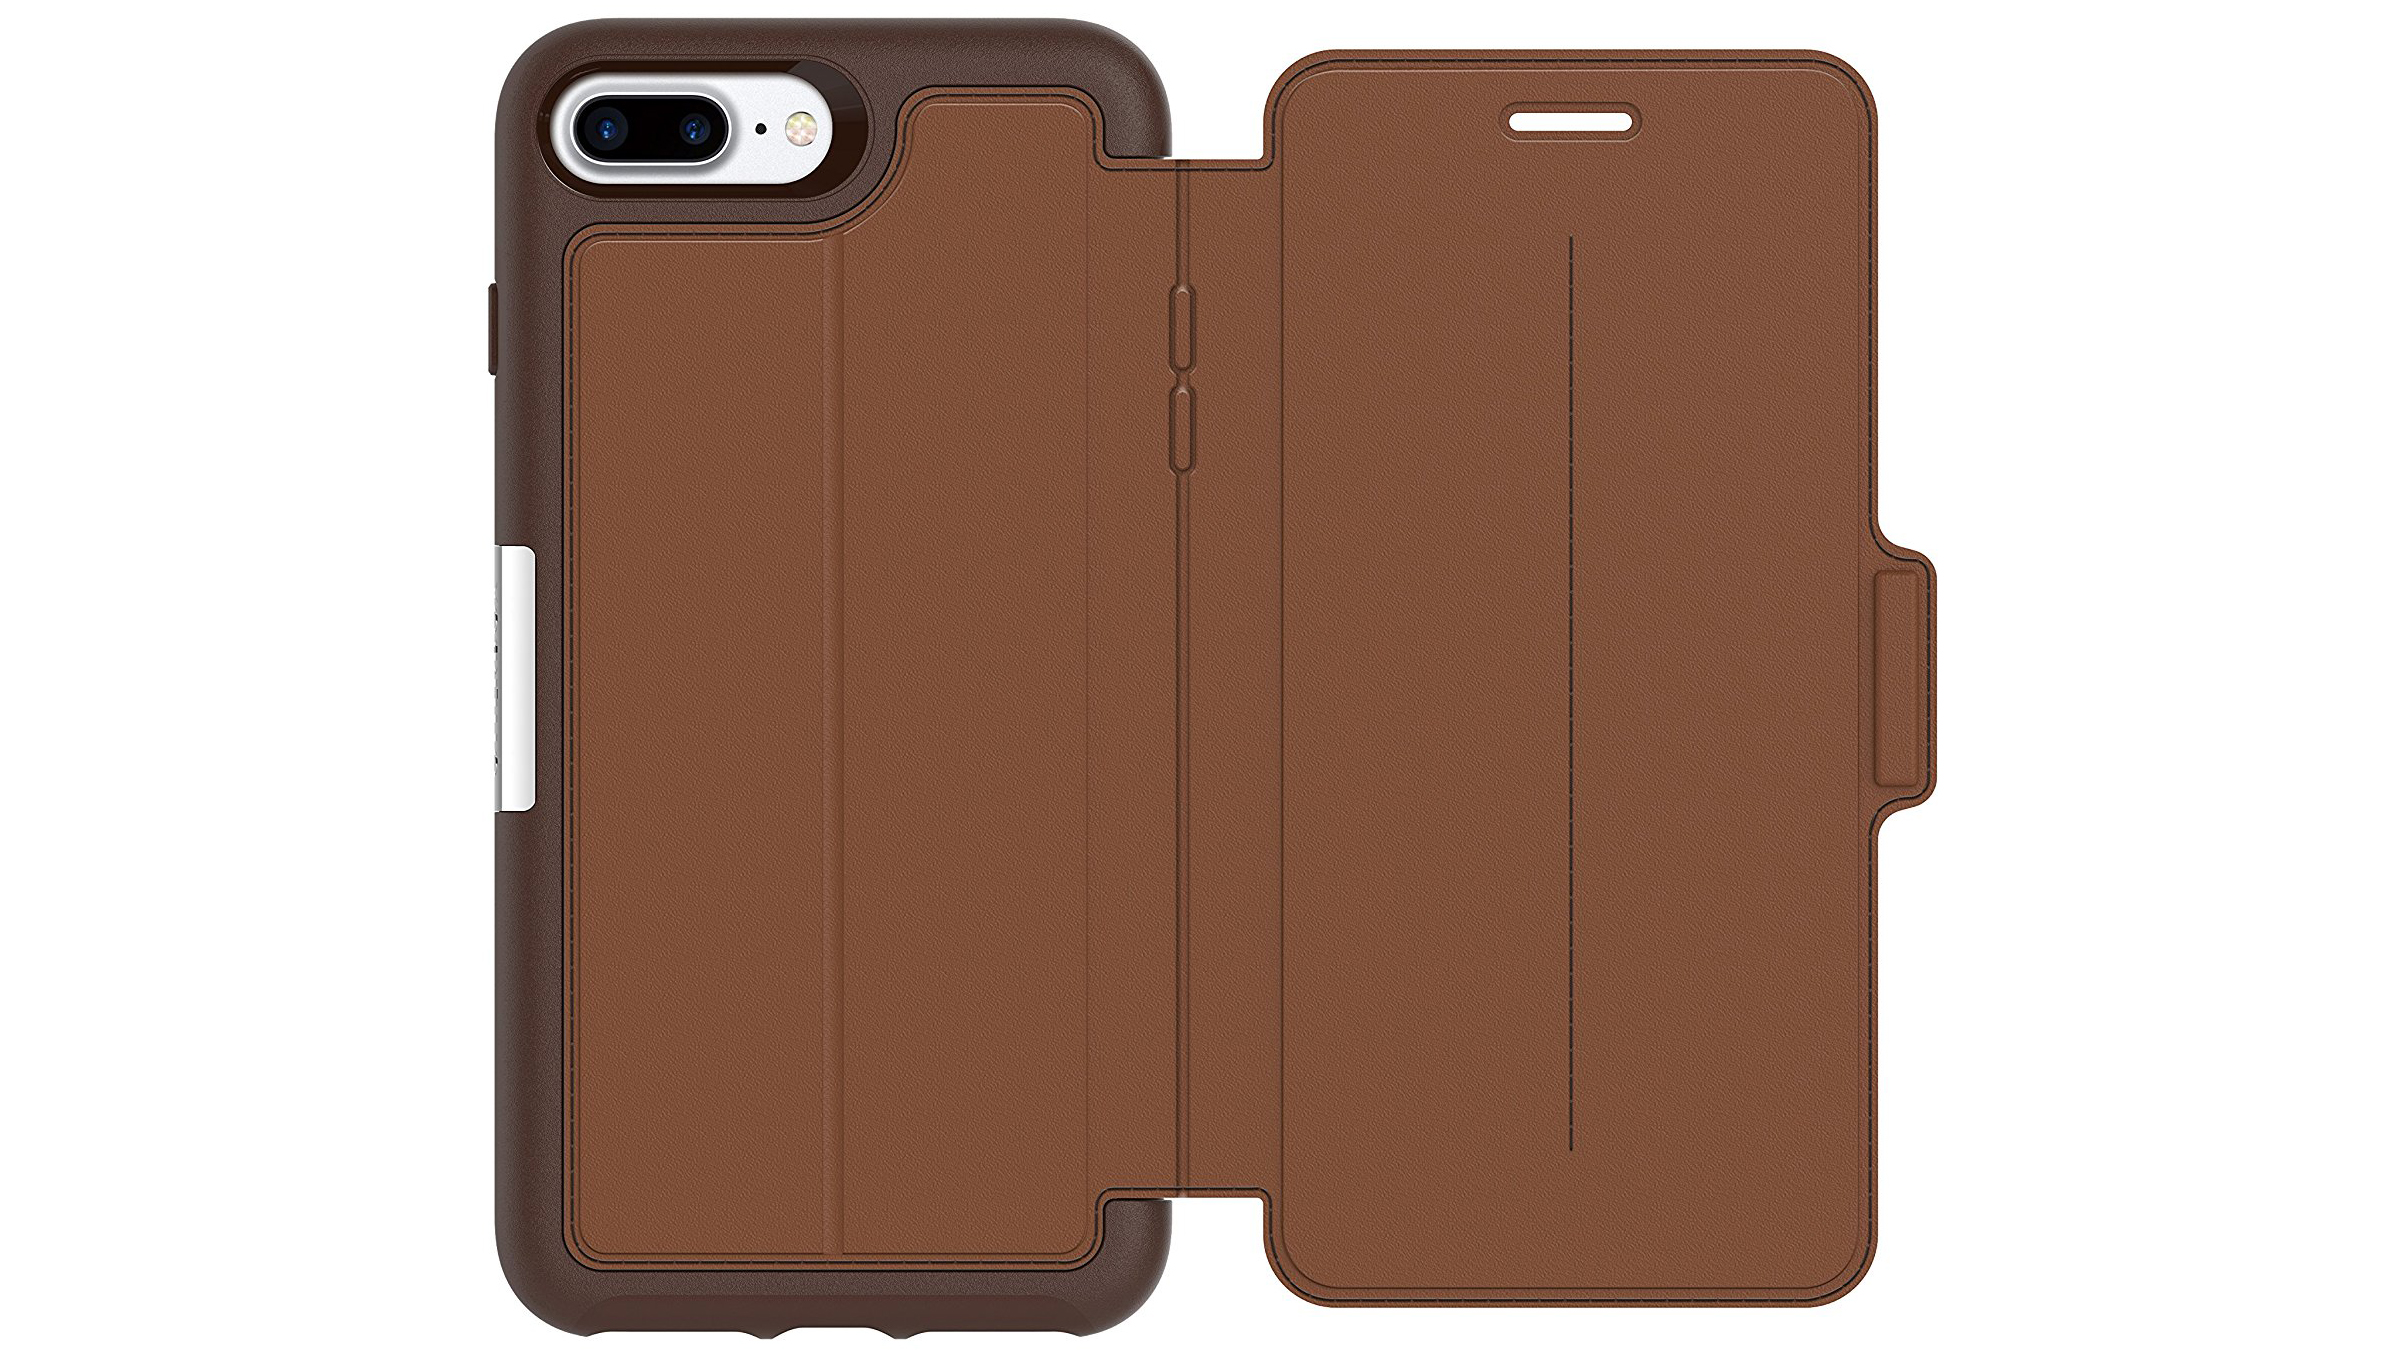 Otterbox Strada case for iPhone 8 and iPhone 8 Plus